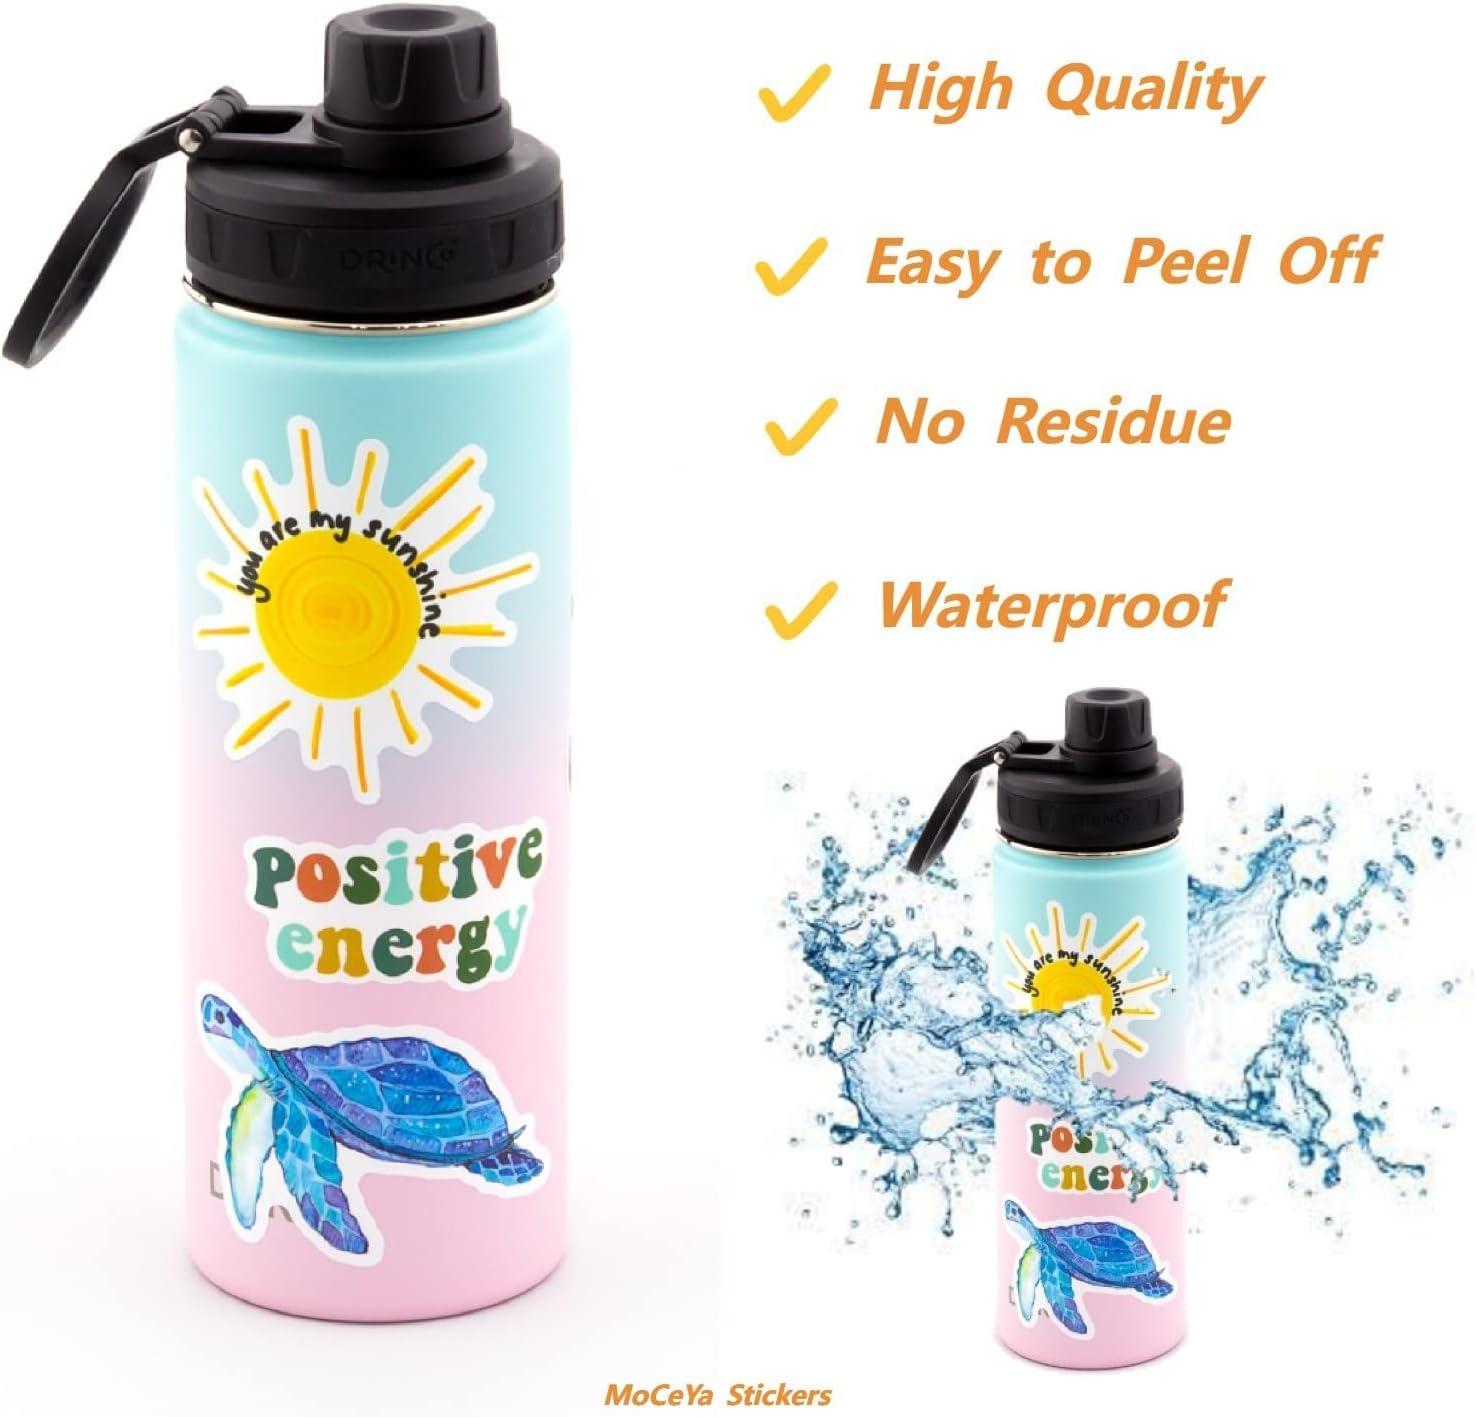 Waterproof Stickers for Water Bottle - MoCeYa 100pcs Cute Aesthetic Stickers  for Laptop, Computer, Phone, PC, Skateboard, Luggage, Hydro Flask Pink  Sticker Pack for Teens Girls Kids Pink Stickers 100 pcs